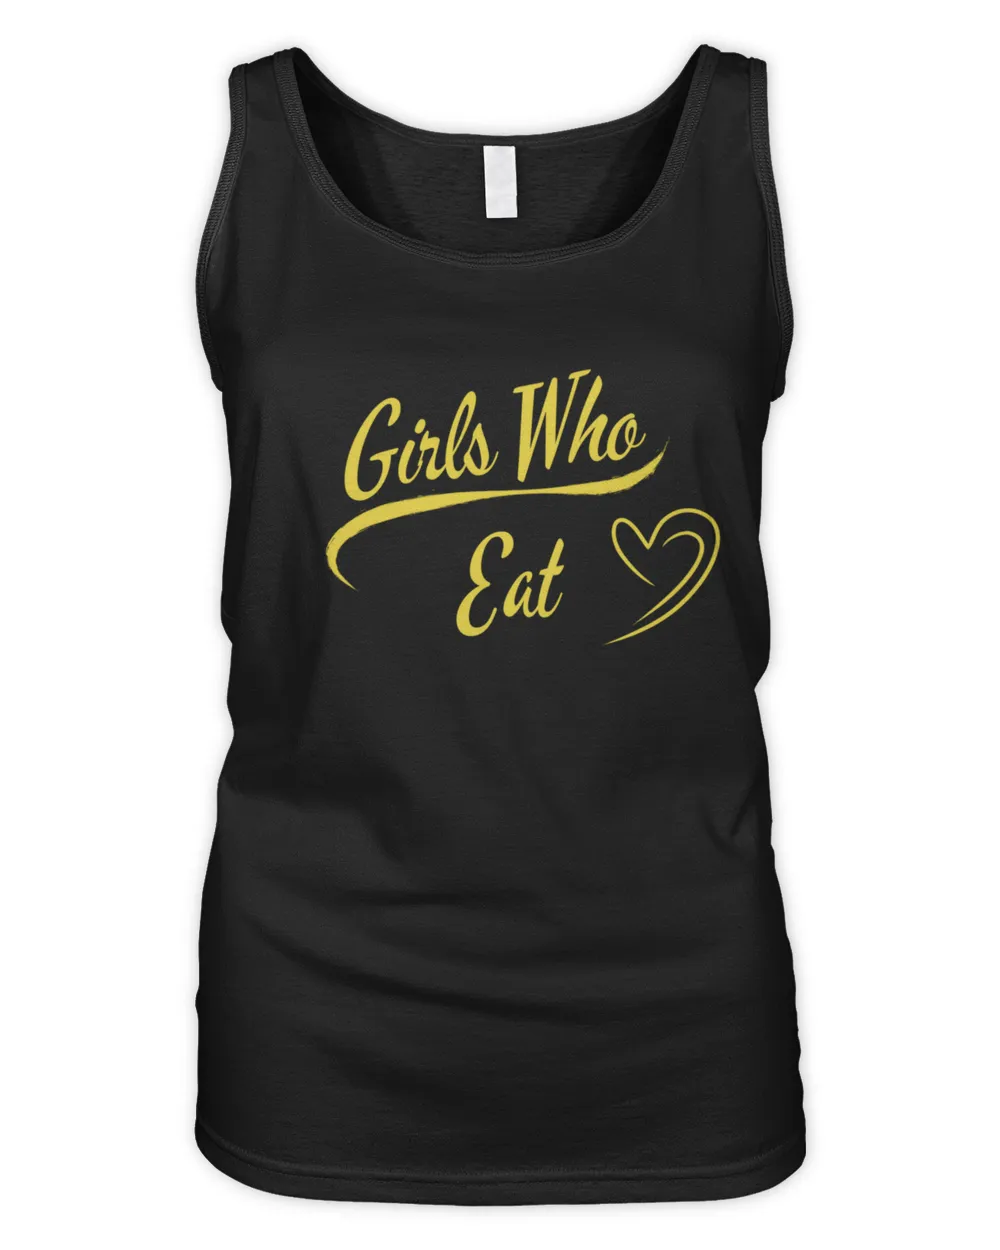 Girls Who Eat Essential T-Shirt